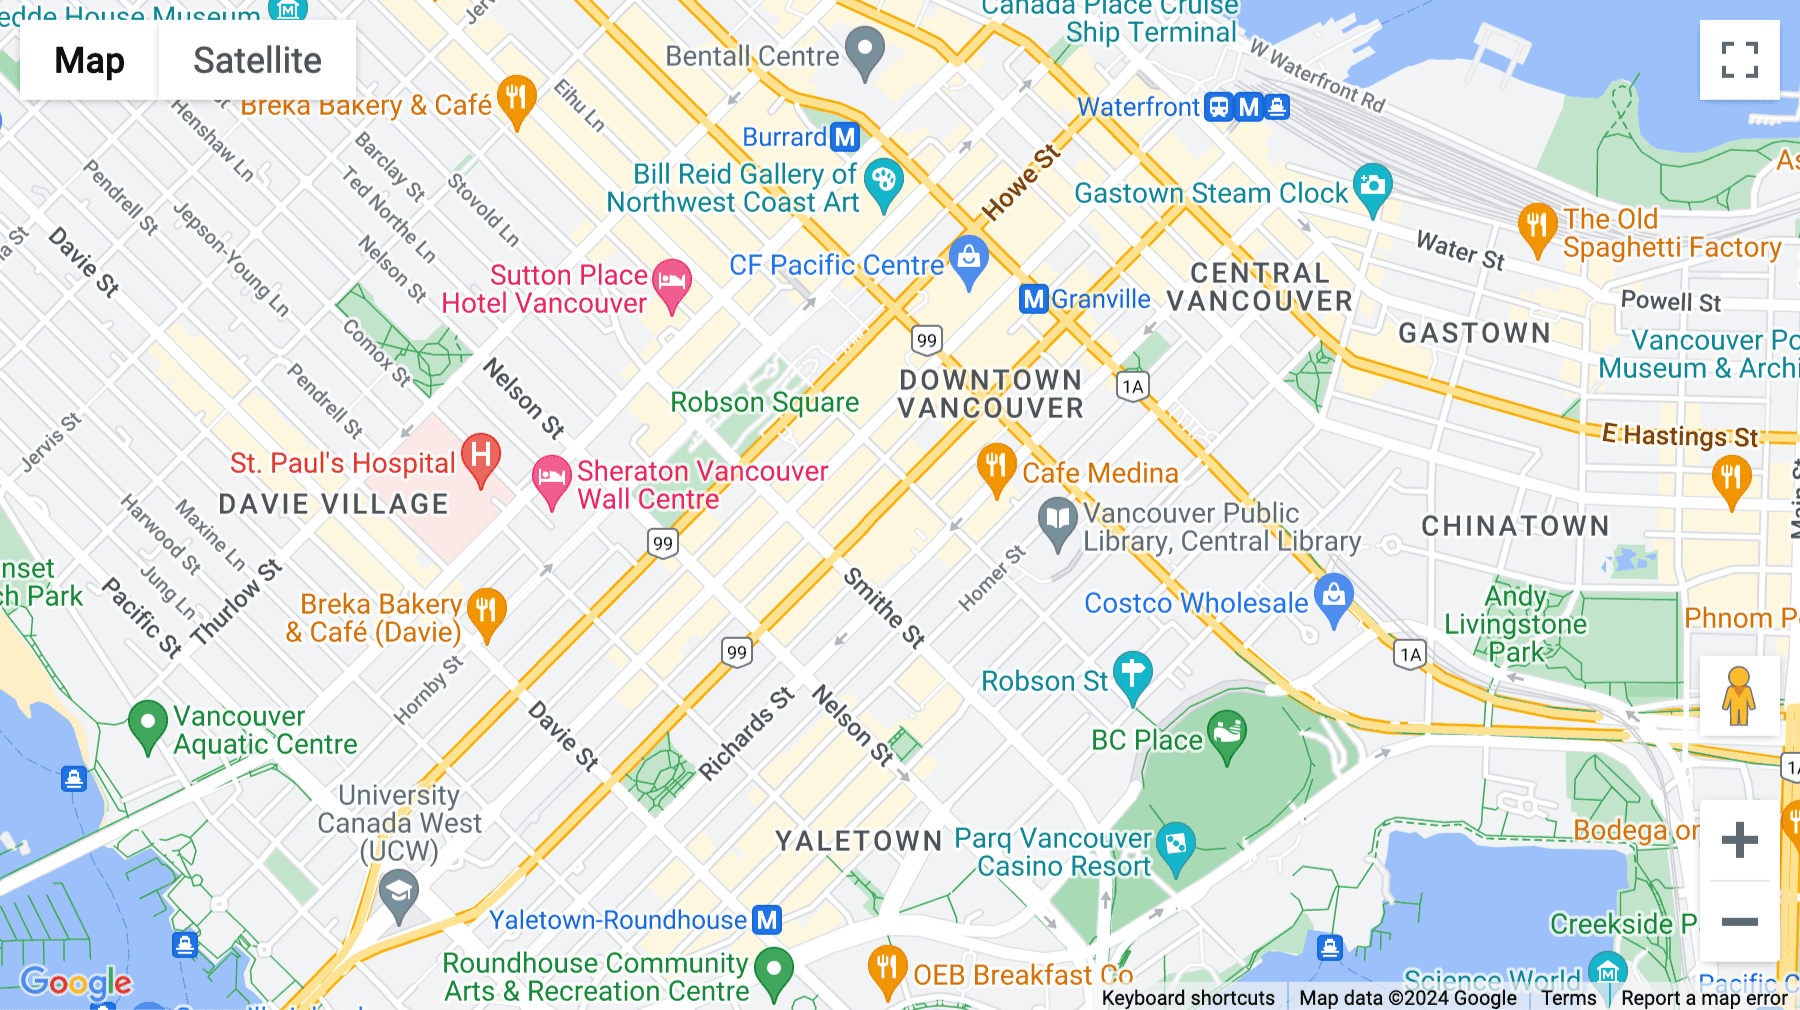 Click for interative map of 550 Robson St., Vancouver